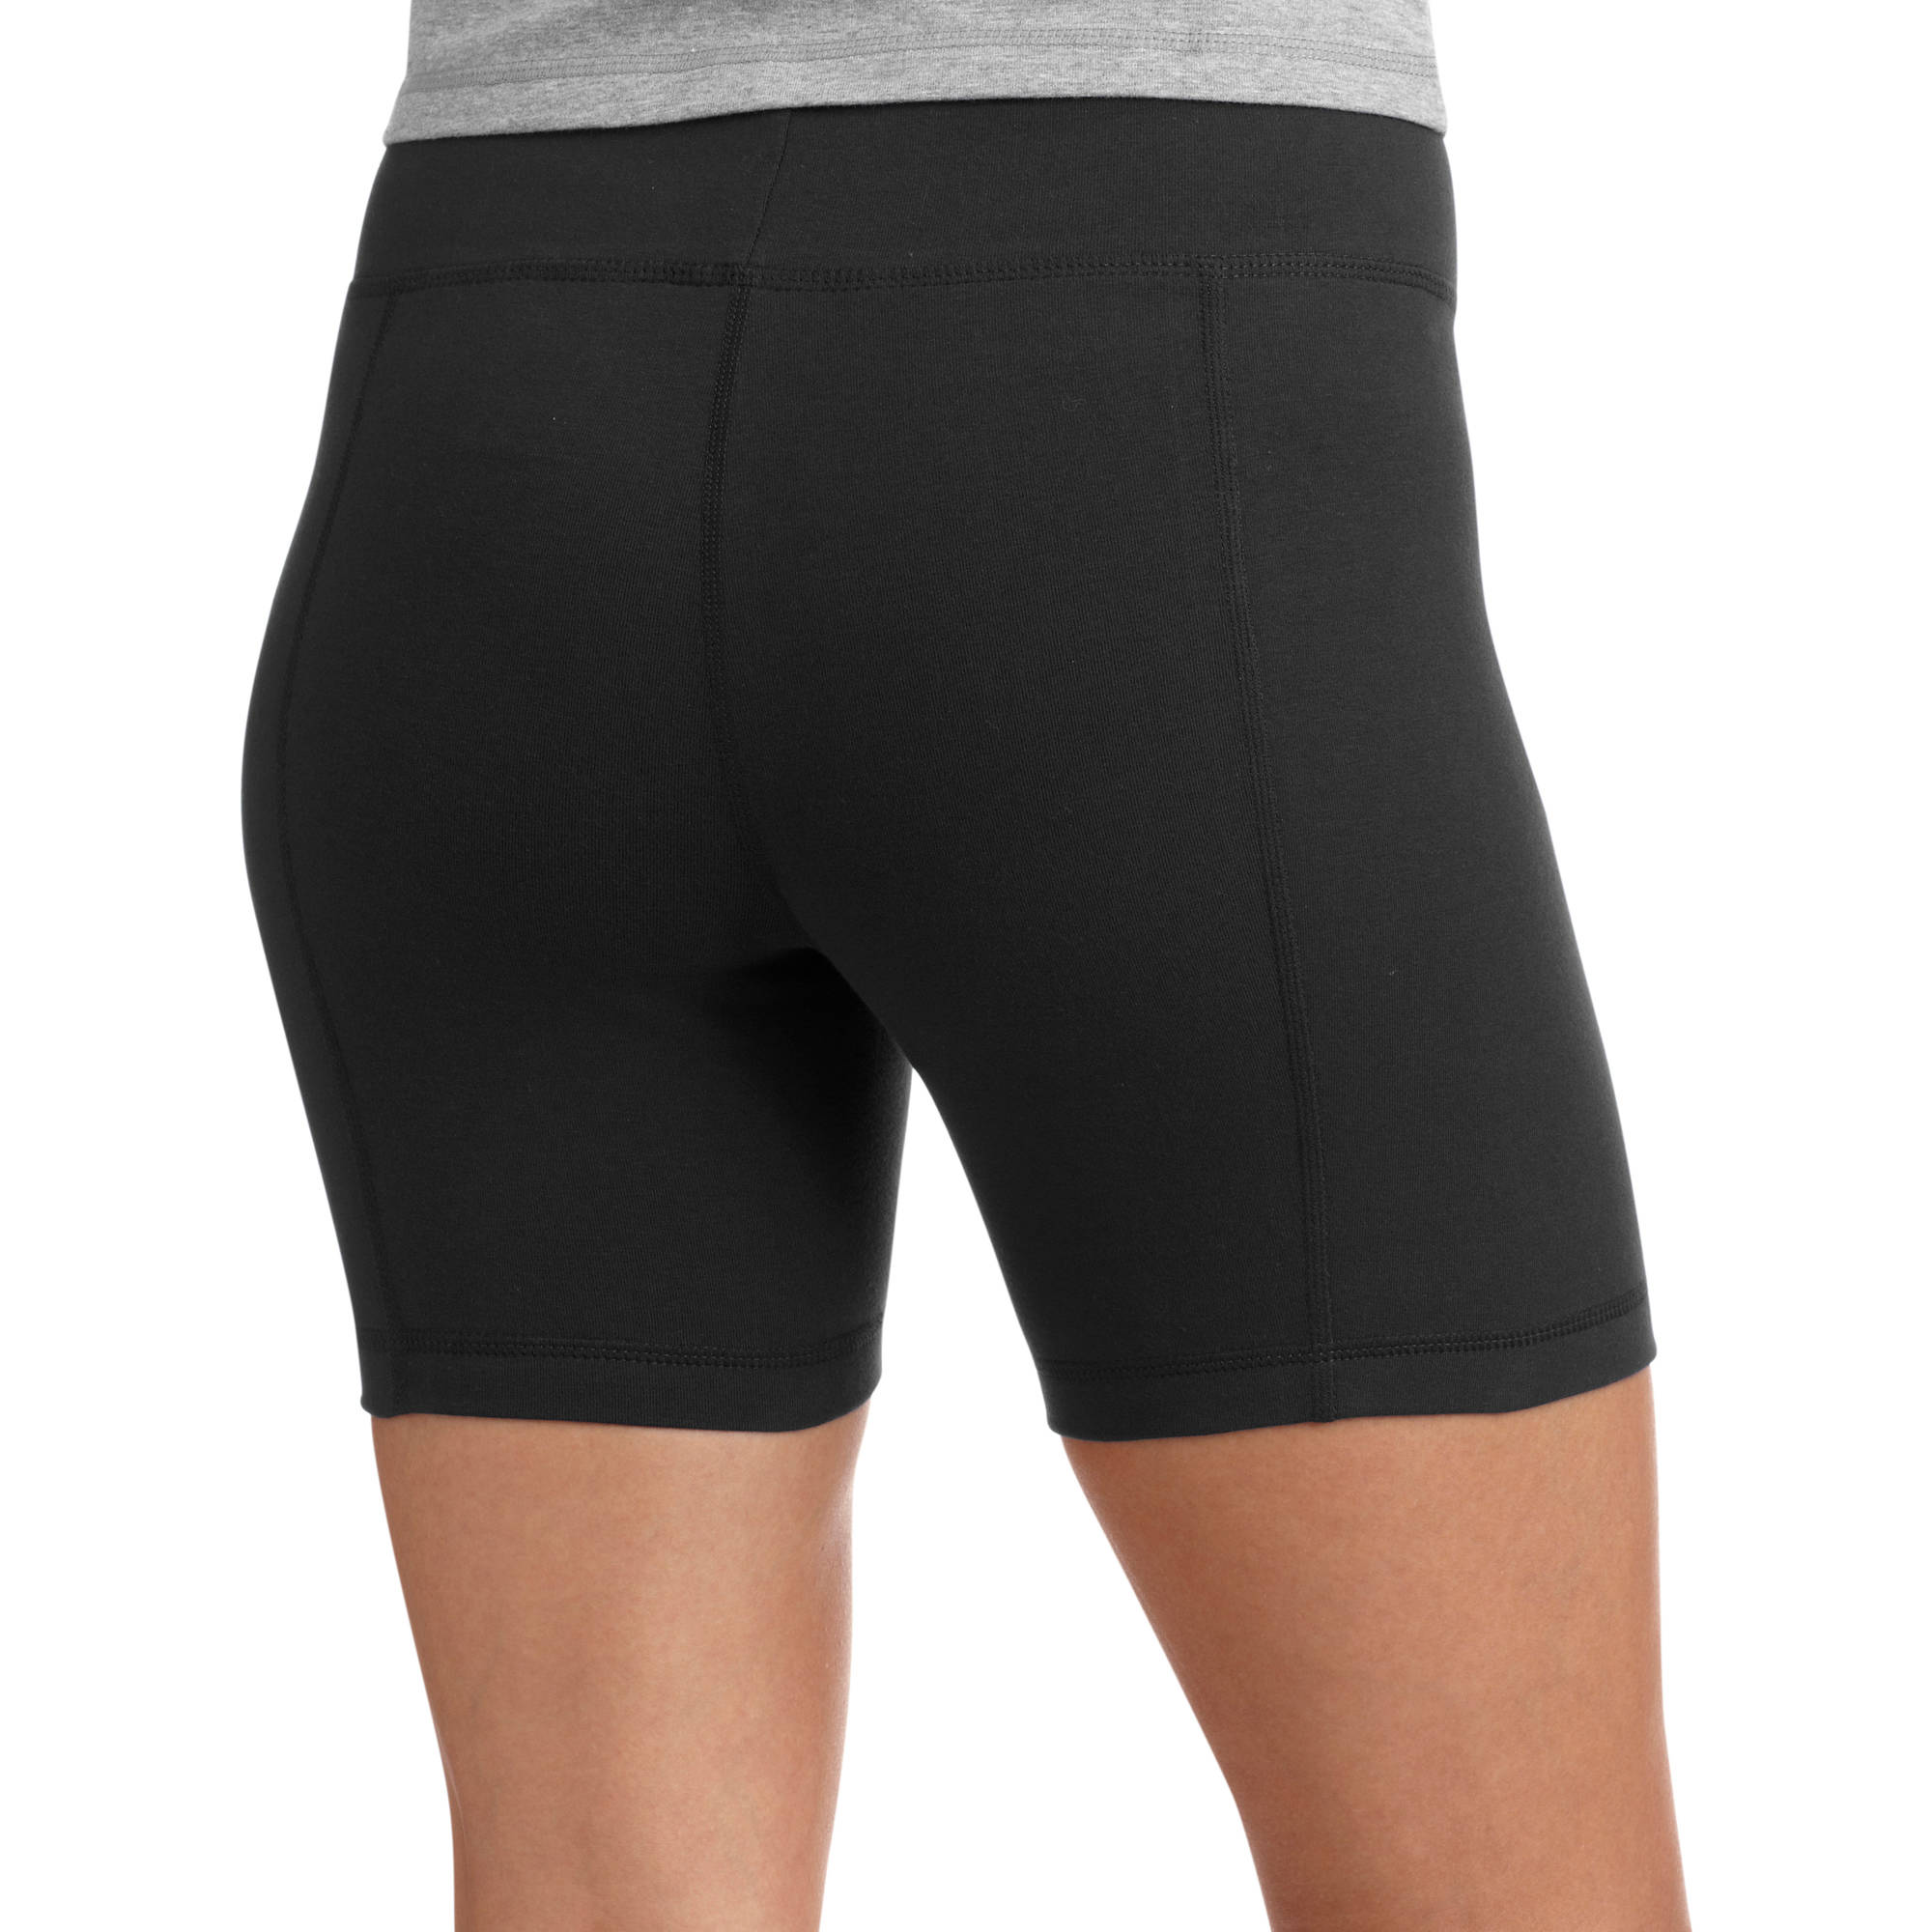 Get a pair of bike shorts today!